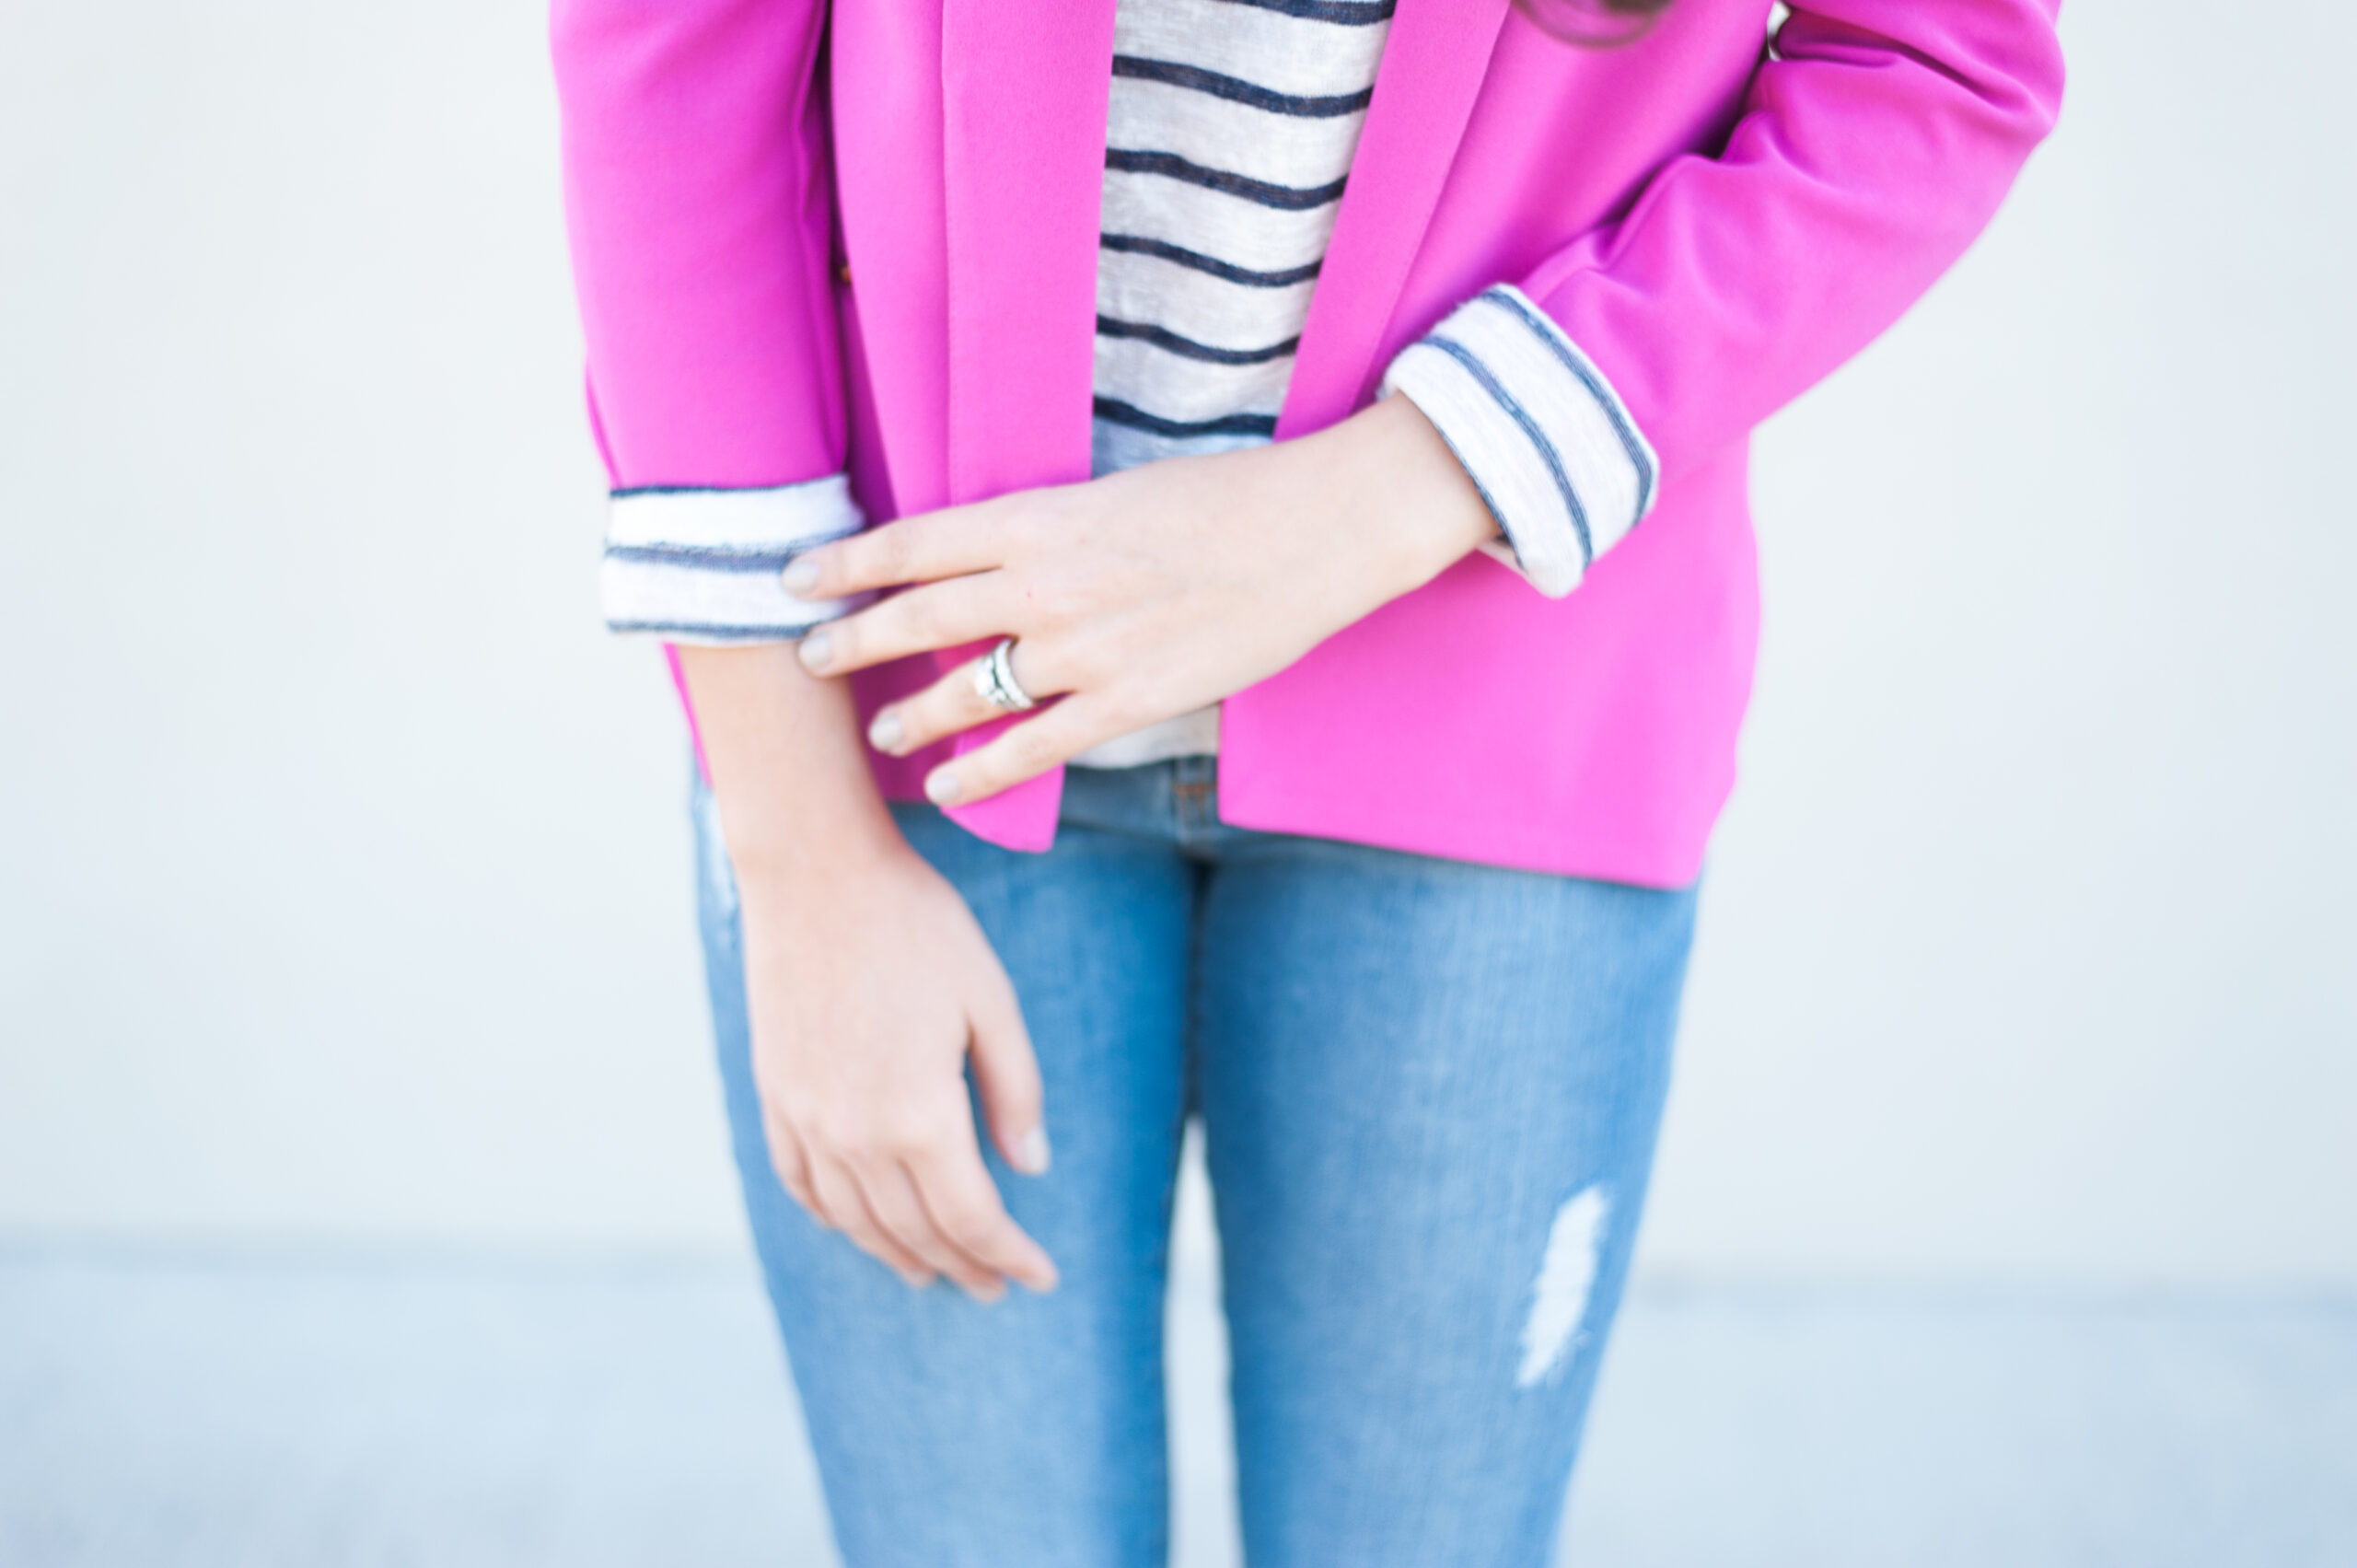 Dress Up Buttercup | Houston Fashion Blog - Dede Raad Pink Blazer Casual Look